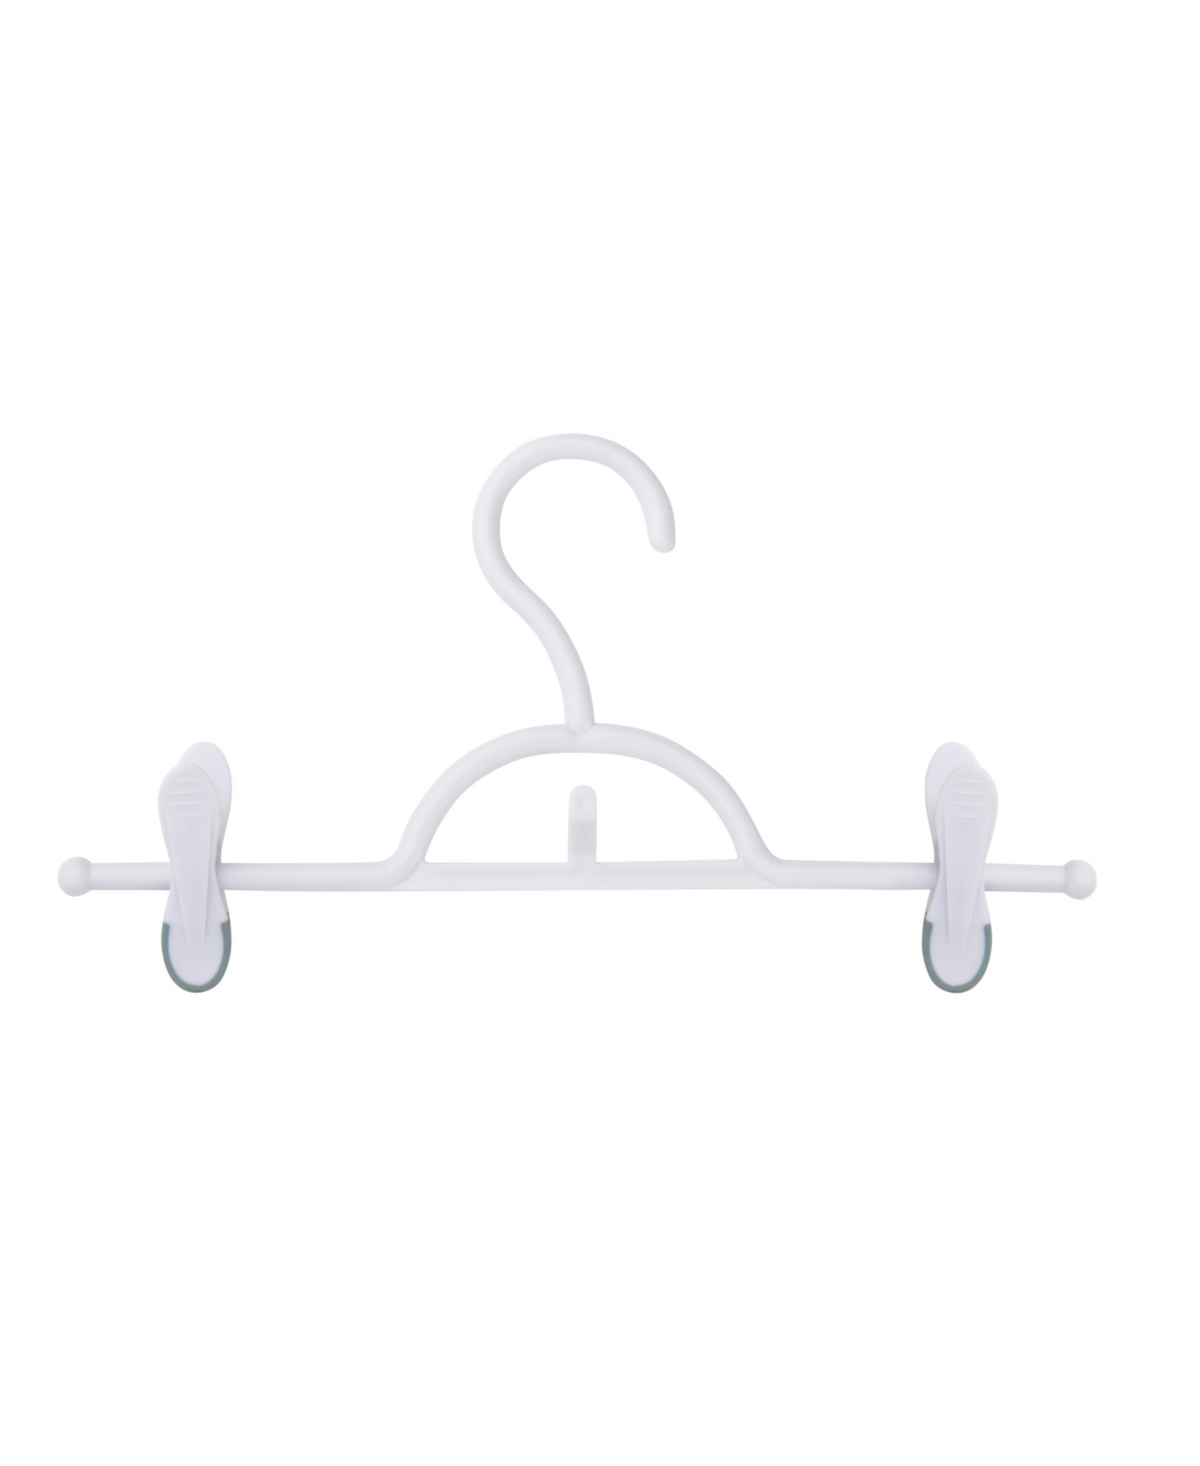 Soft Touch Pant Hangers, Set of 12 - White